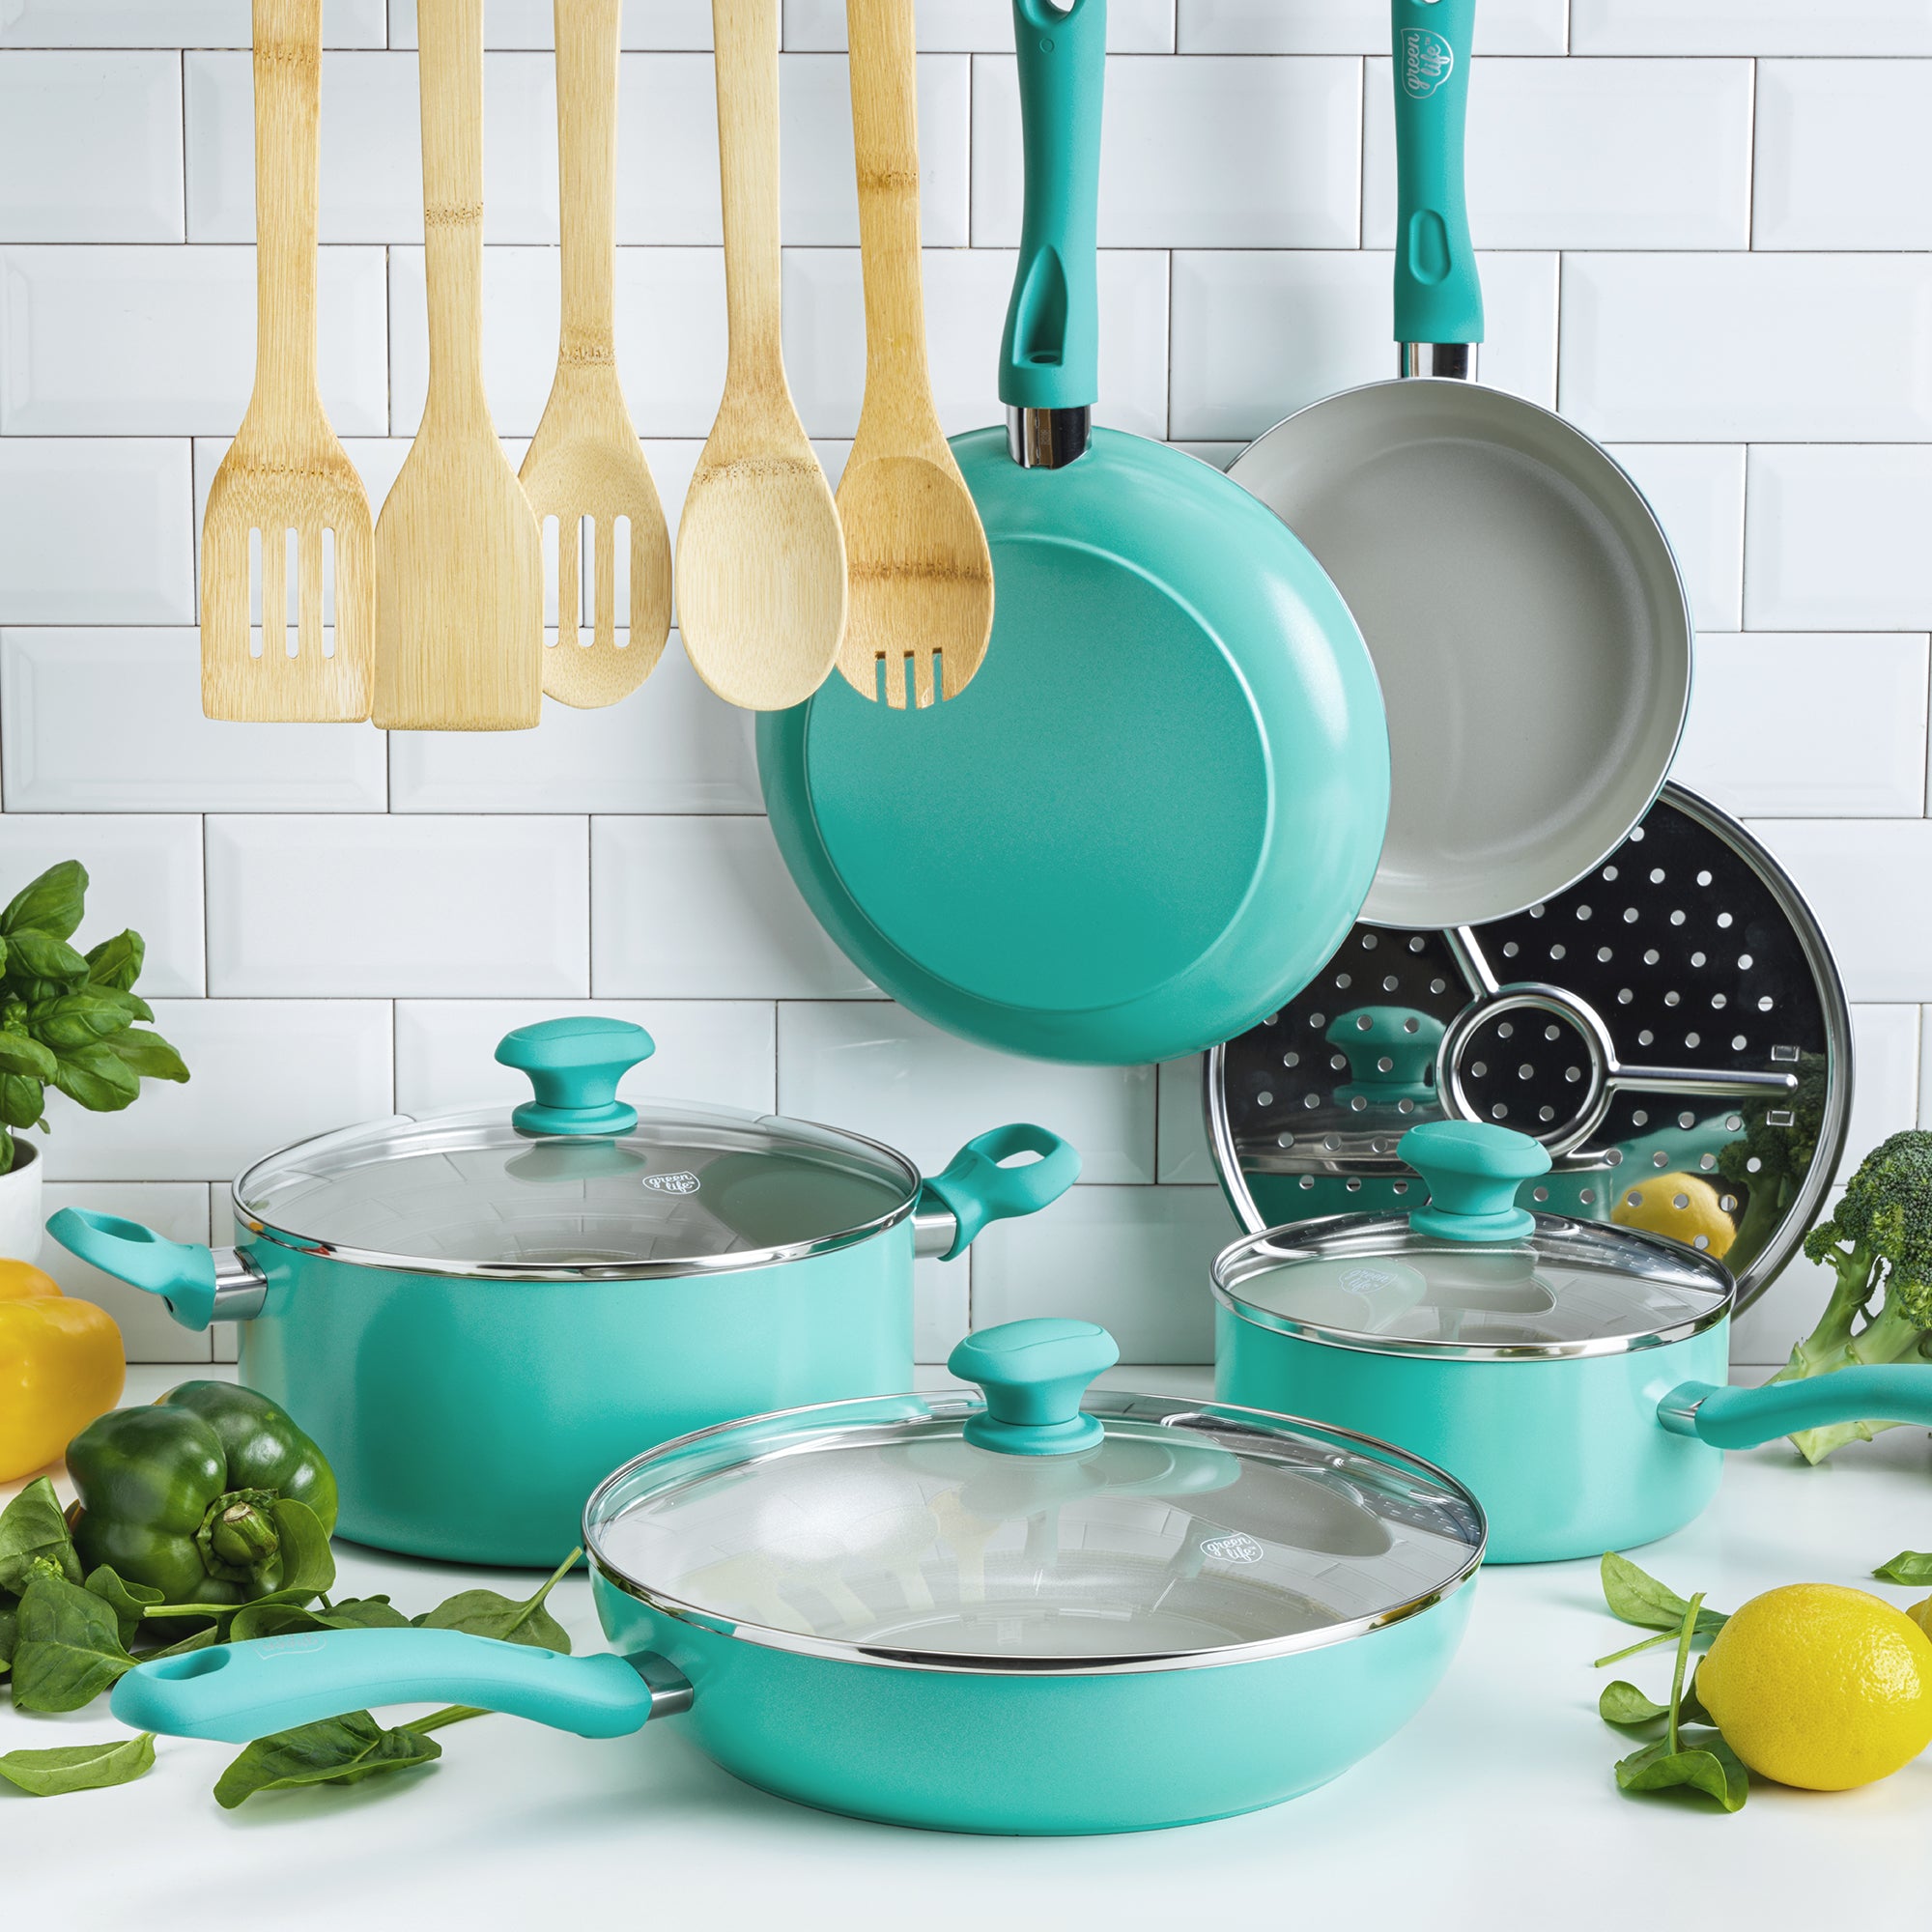 Reviews for GreenLife Diamond 13-Piece Aluminum Ceramic Nonstick Cookware  Set in Turquoise